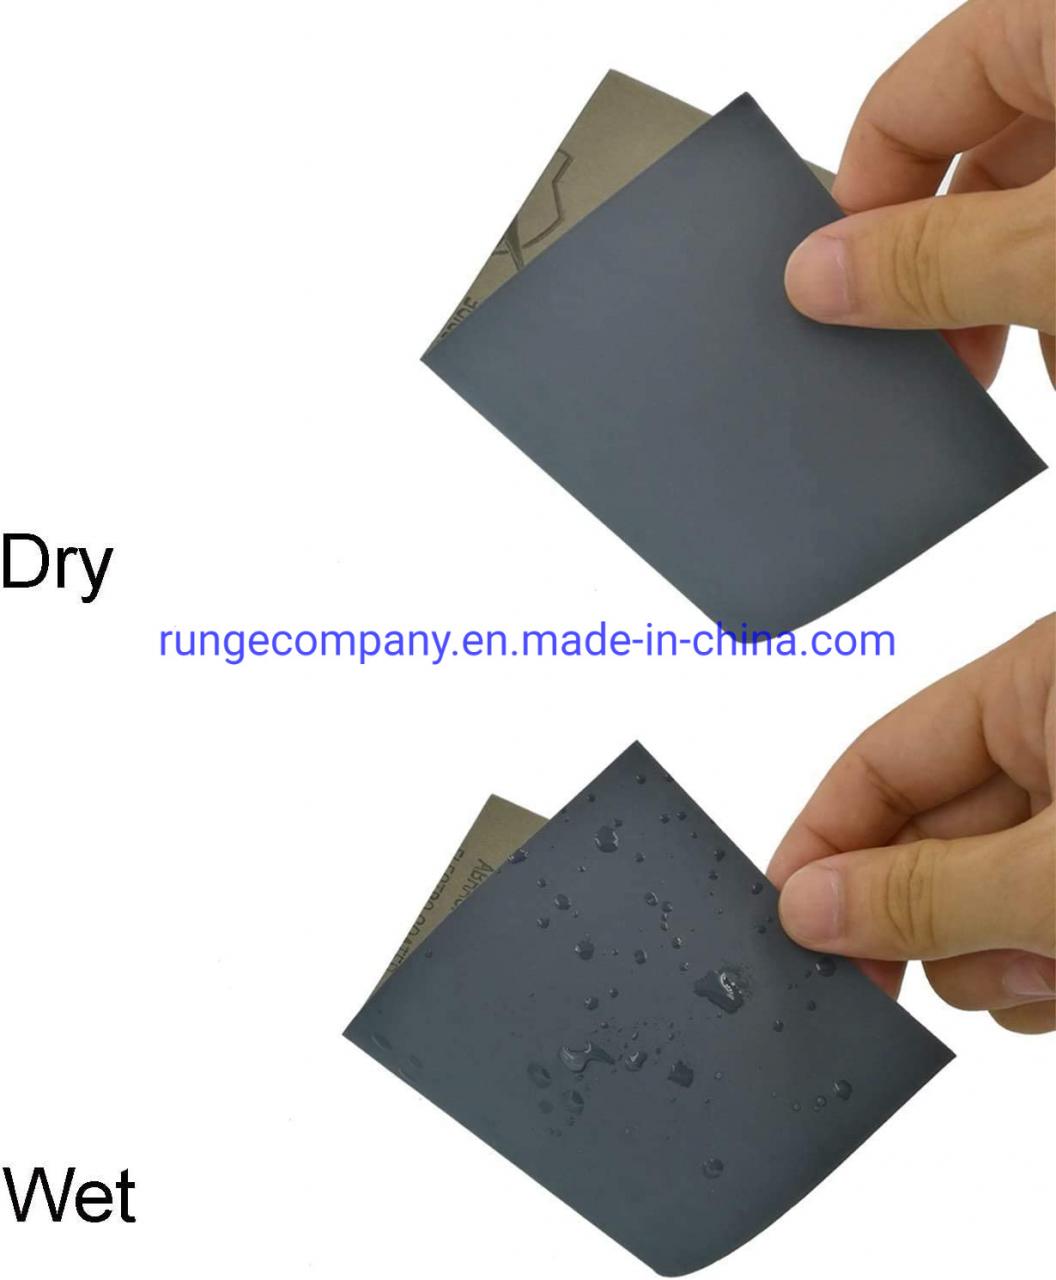 Sandpaper 400 to 3000 Grit Wet Dry Sandpaper Assortment 9X11 Inch for  Automotive Sanding Wood Furniture Finishing Wood Turing Finishing and More  - China Abrasive, Sand Paper | Made-in-China.com